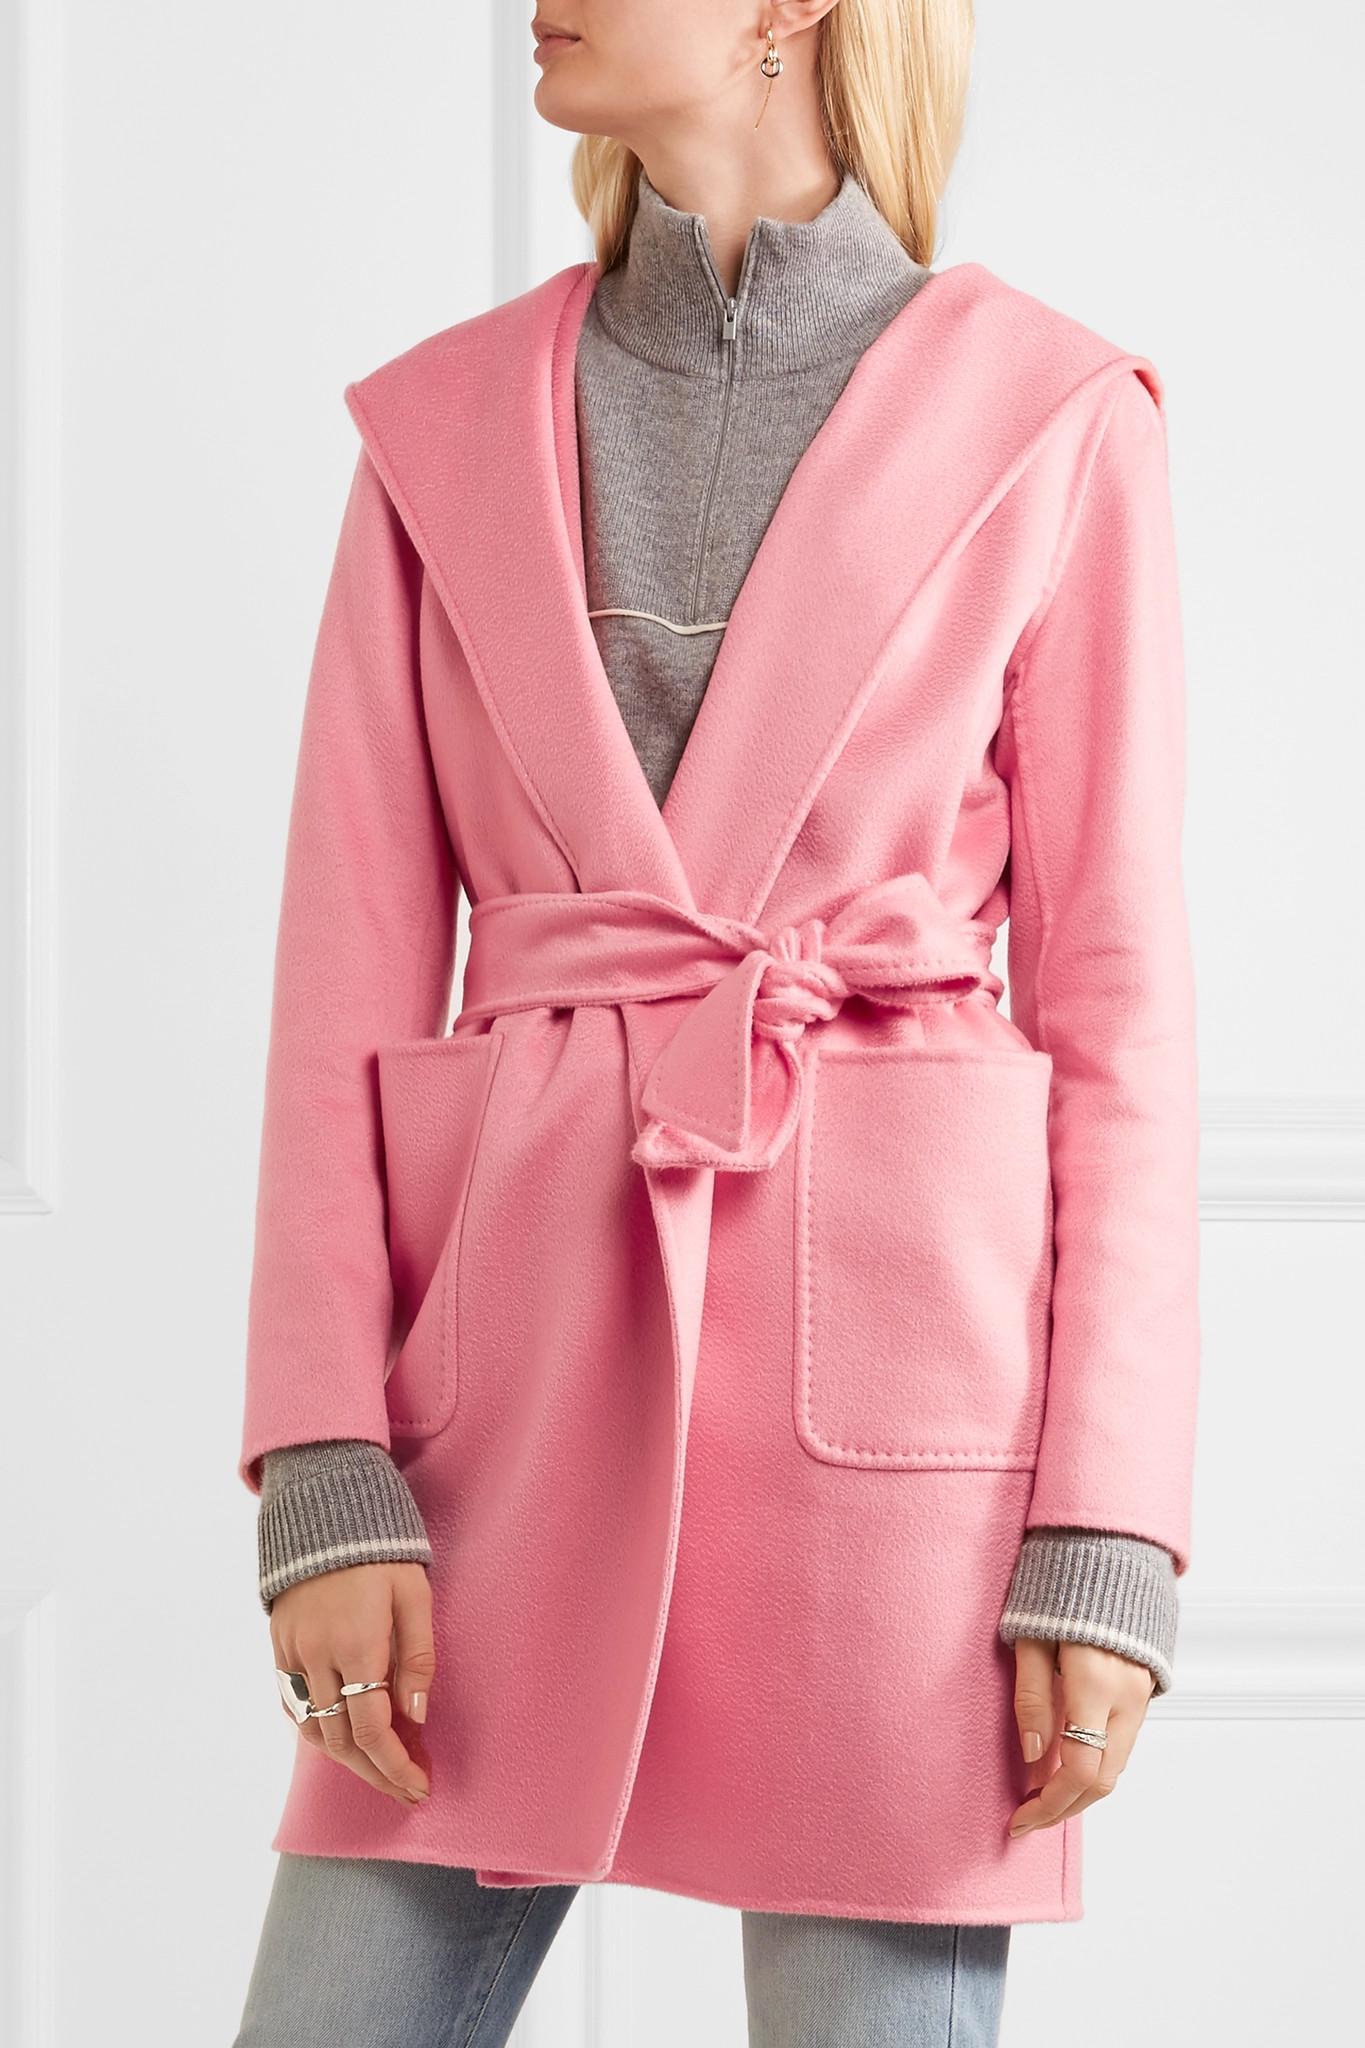 Lyst - Max Mara Hooded Cashmere Coat in Pink